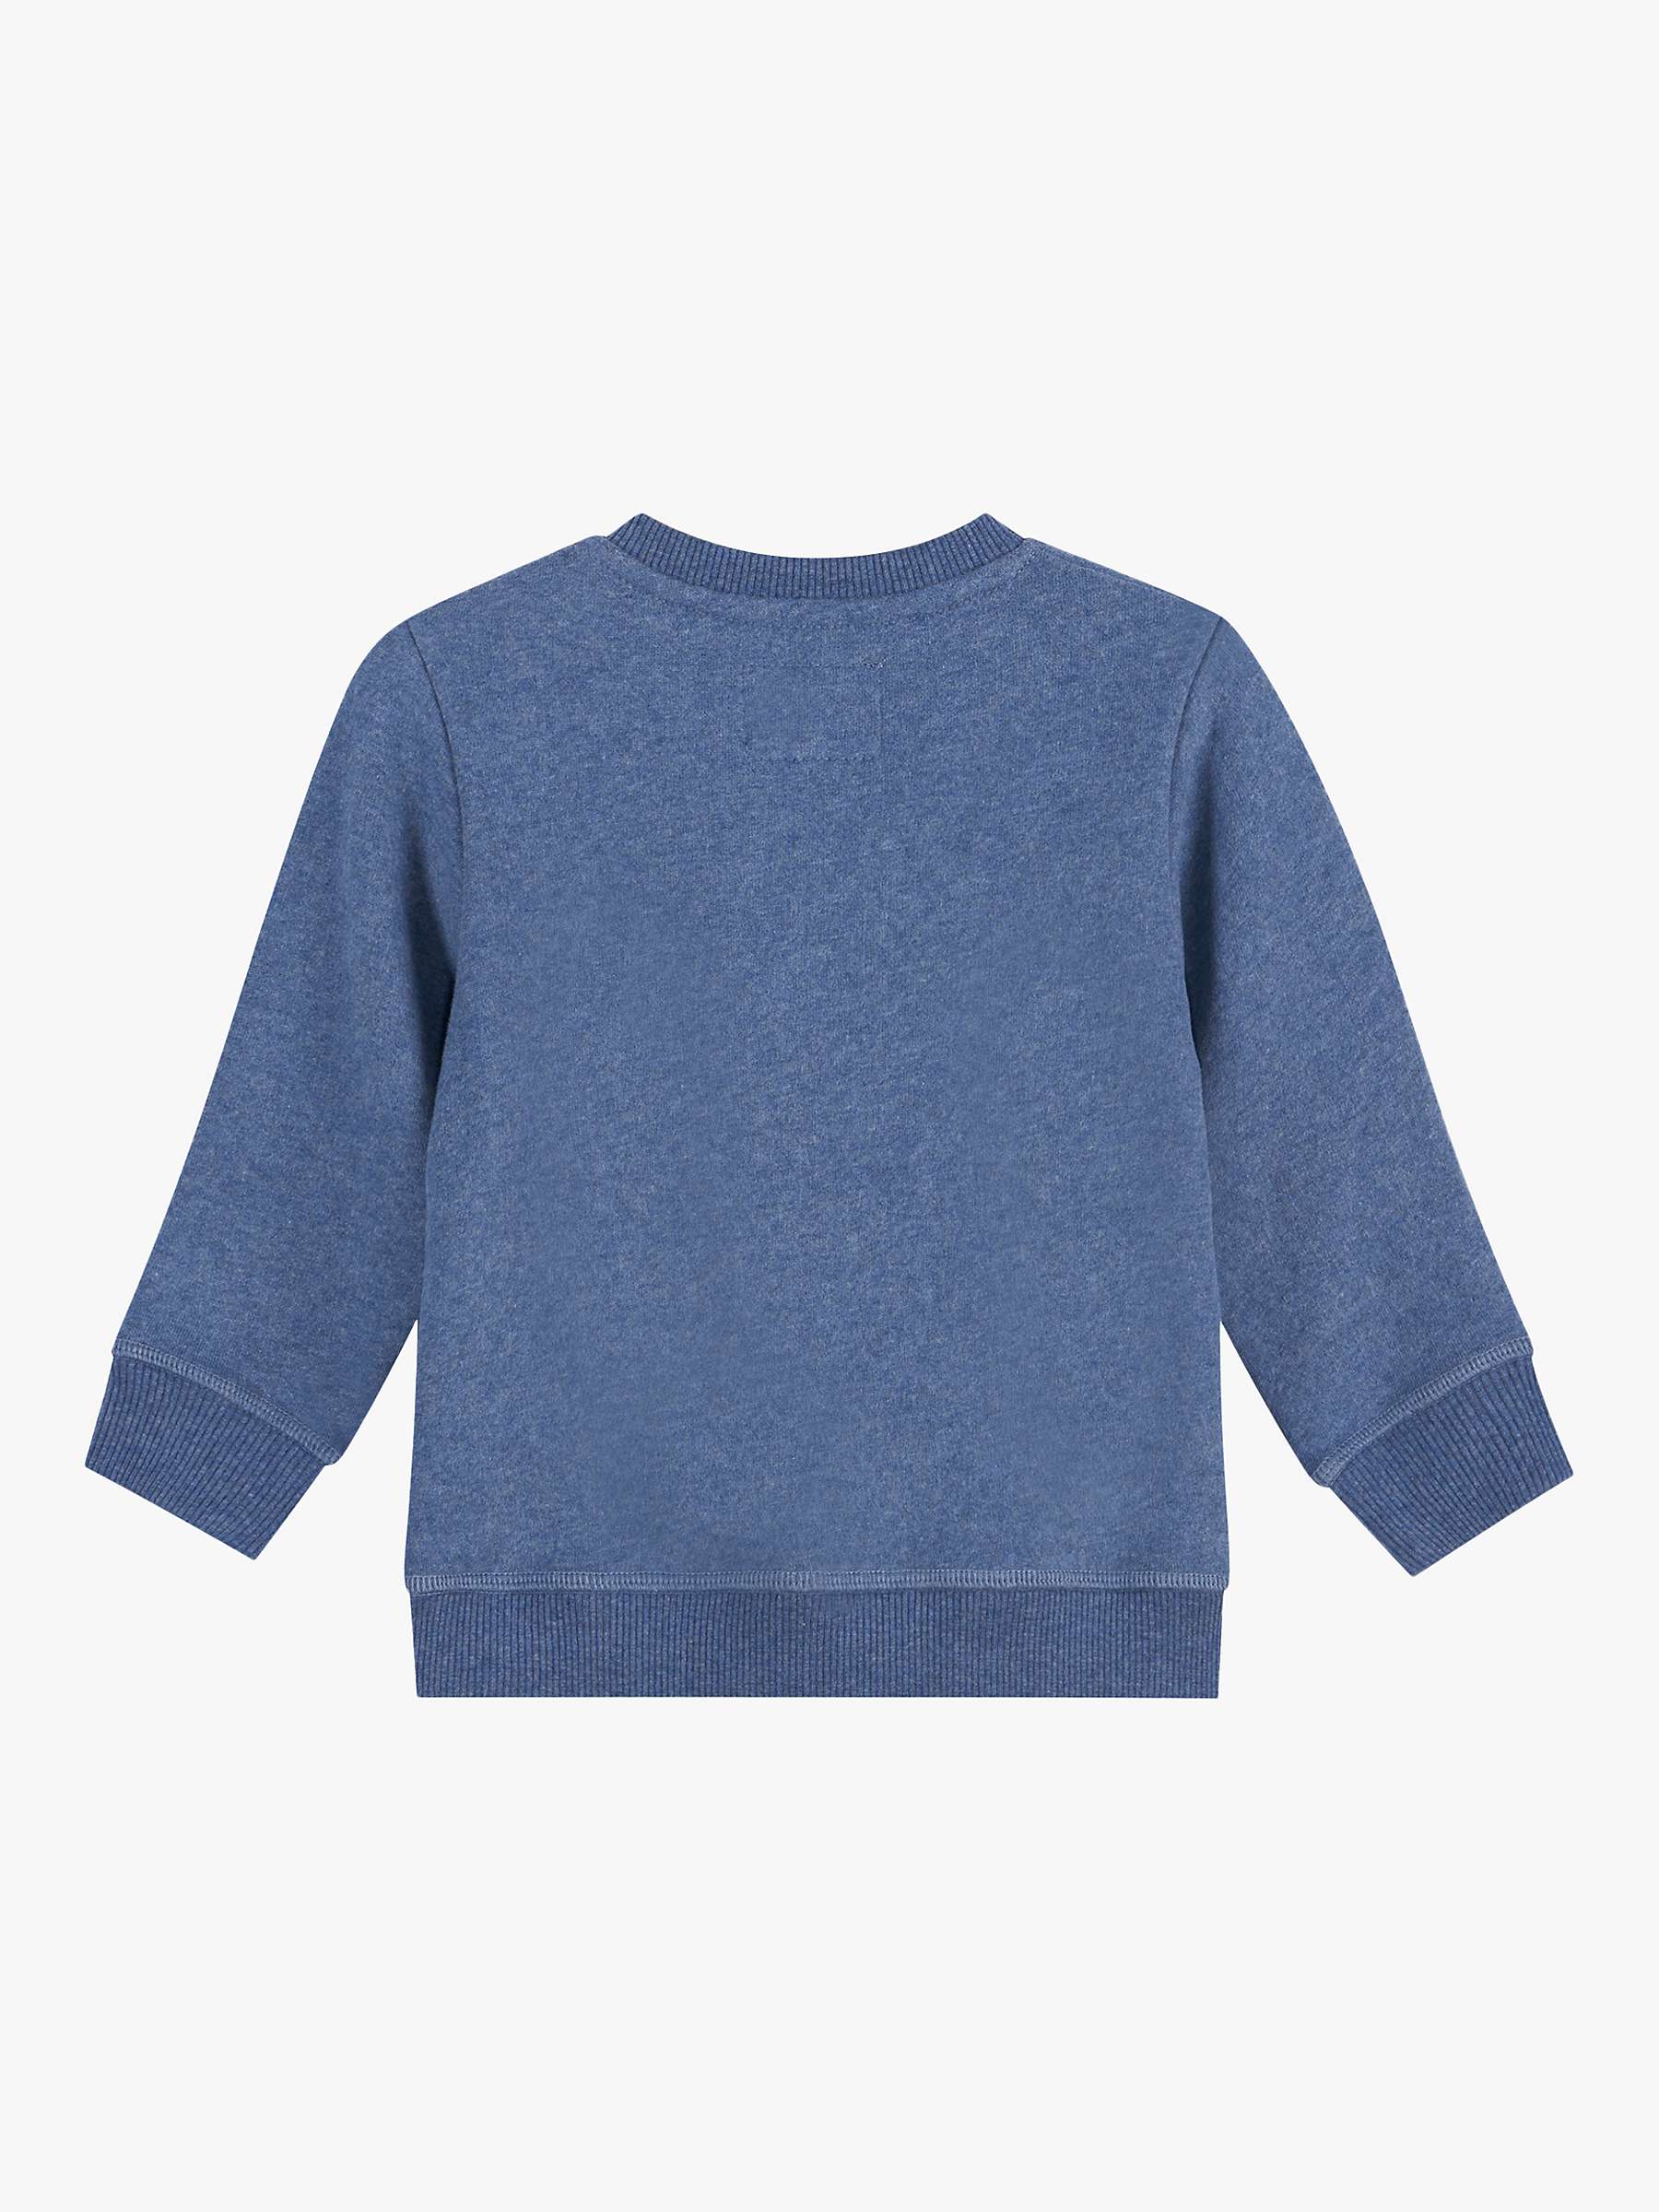 Buy Trotters Baby Here Comes Trouble Sweatshirt Online at johnlewis.com